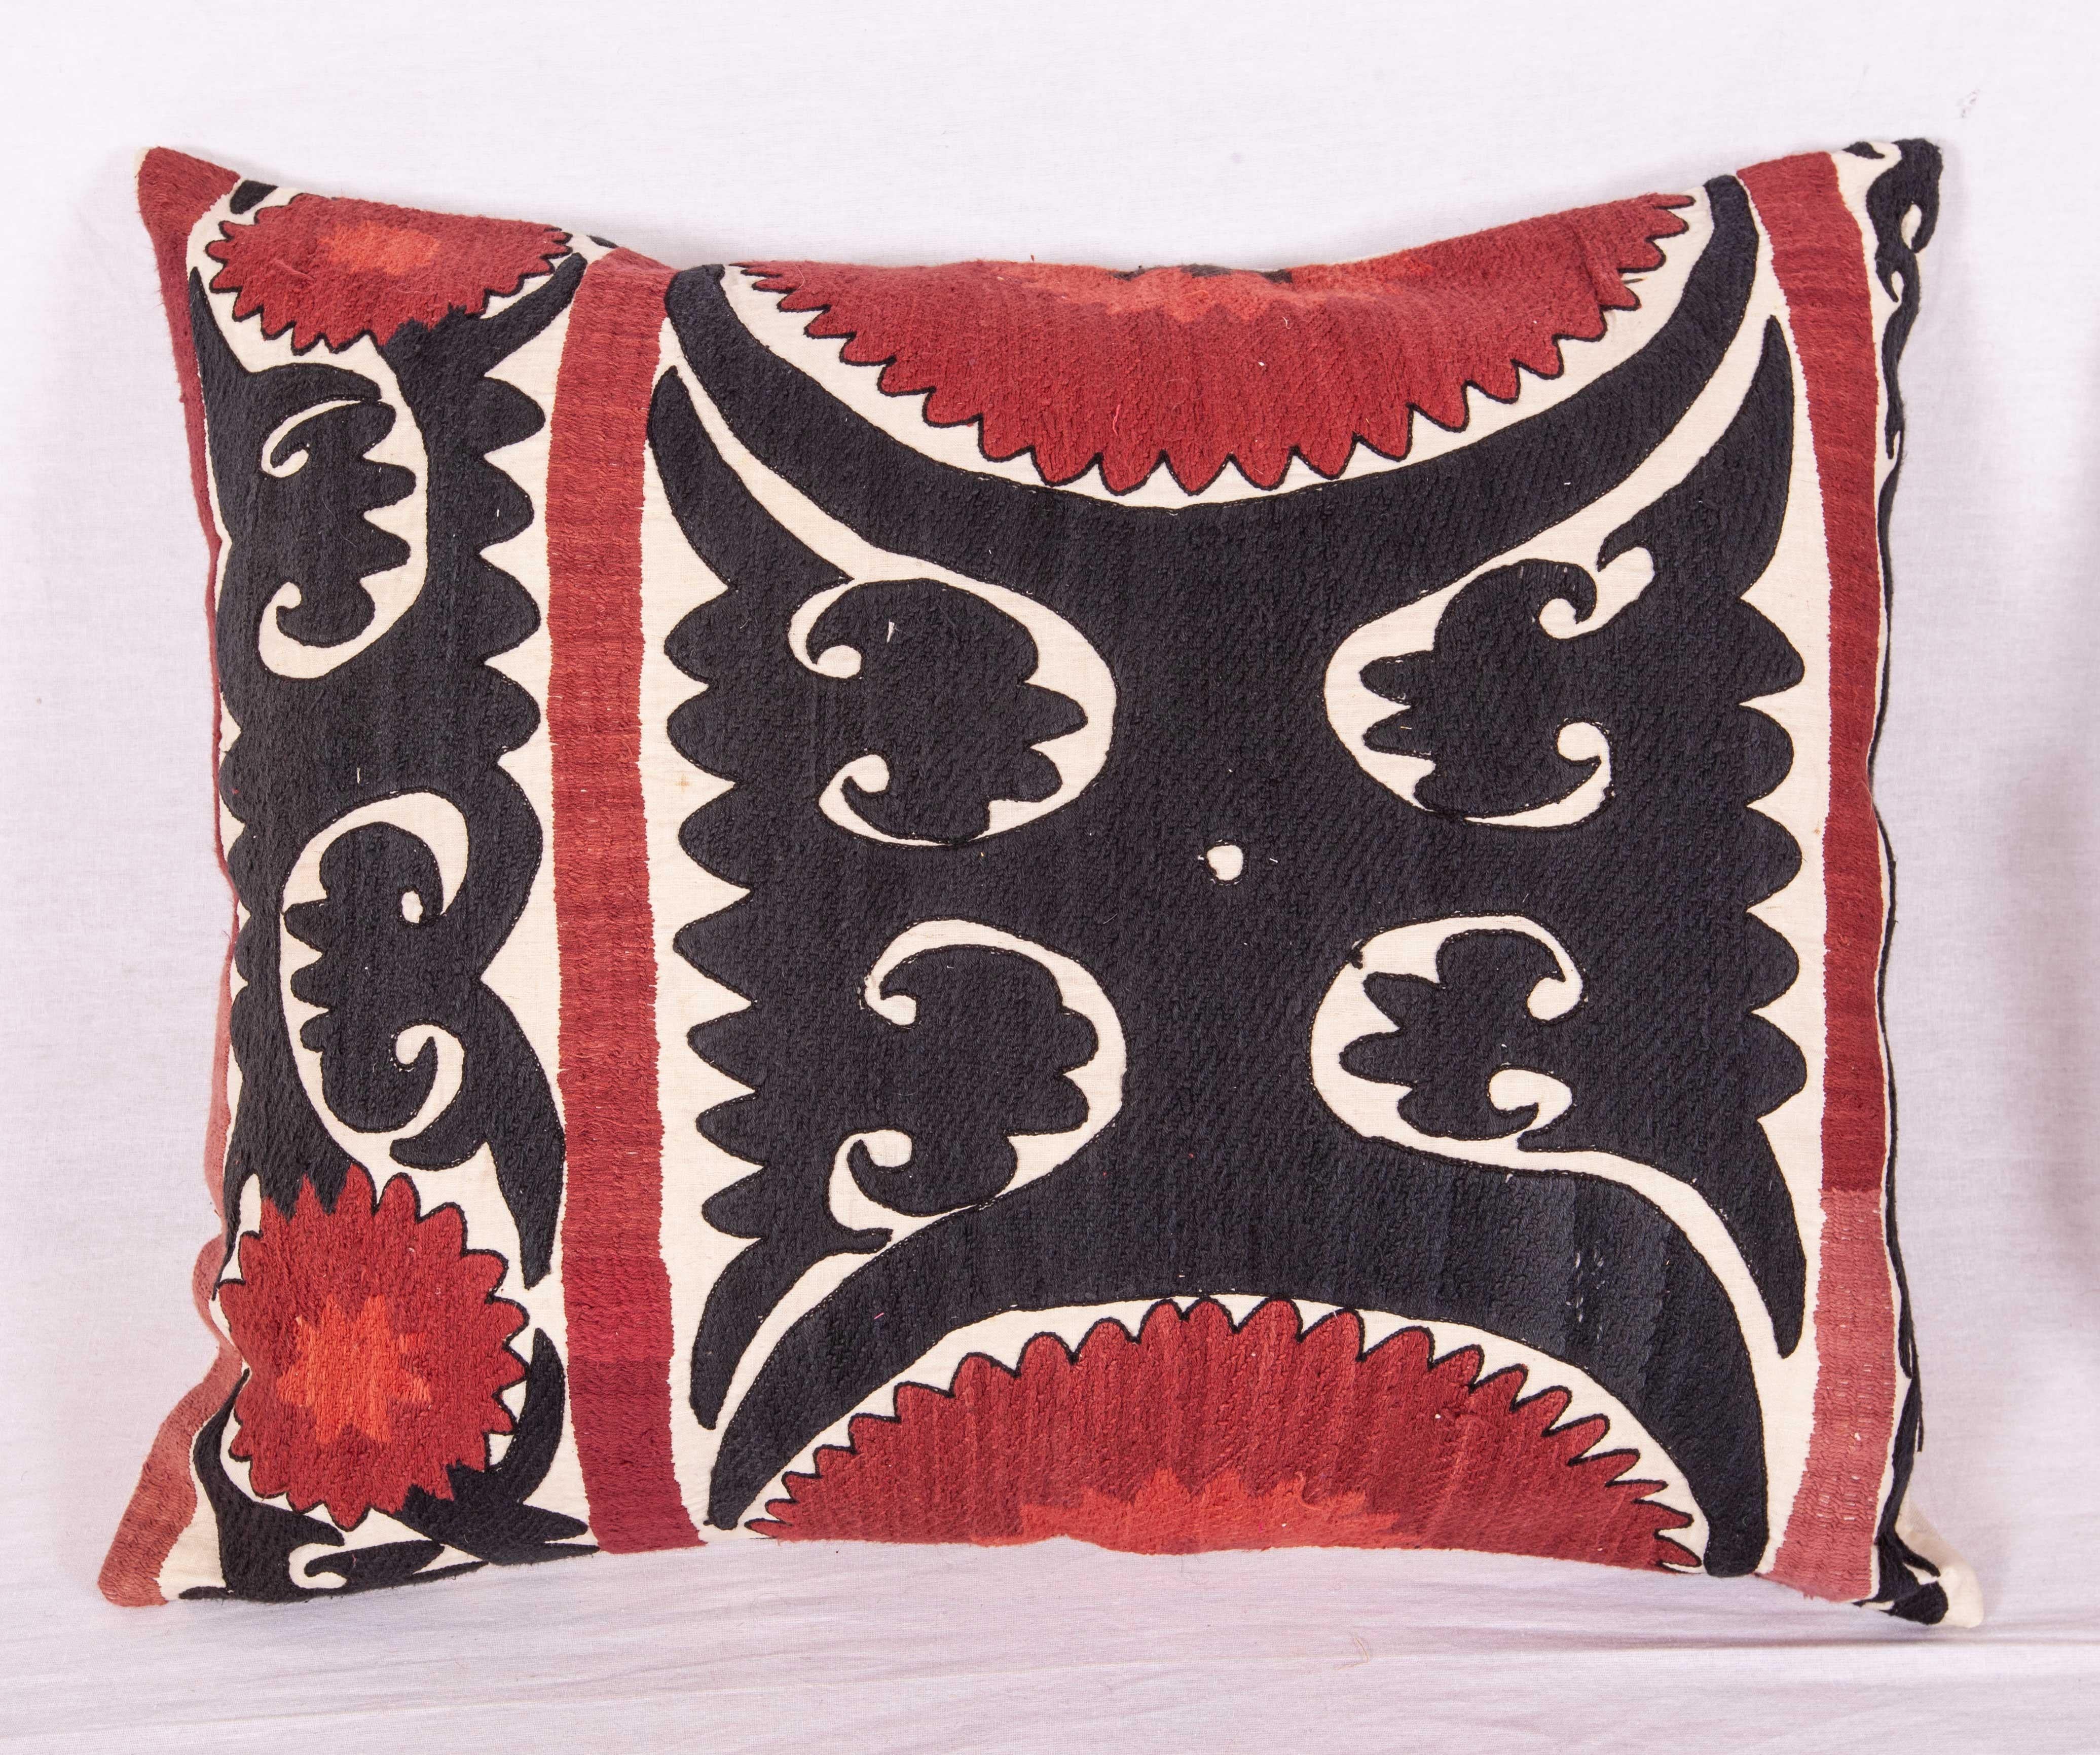 The pillow/cushion covers are made from a vintage Syrian Bedouin embroidery. It does not come with an insert. The backing is made of linen. Please note filling is not provided. Since the item mentioned above is either antique, old, or vintage it is